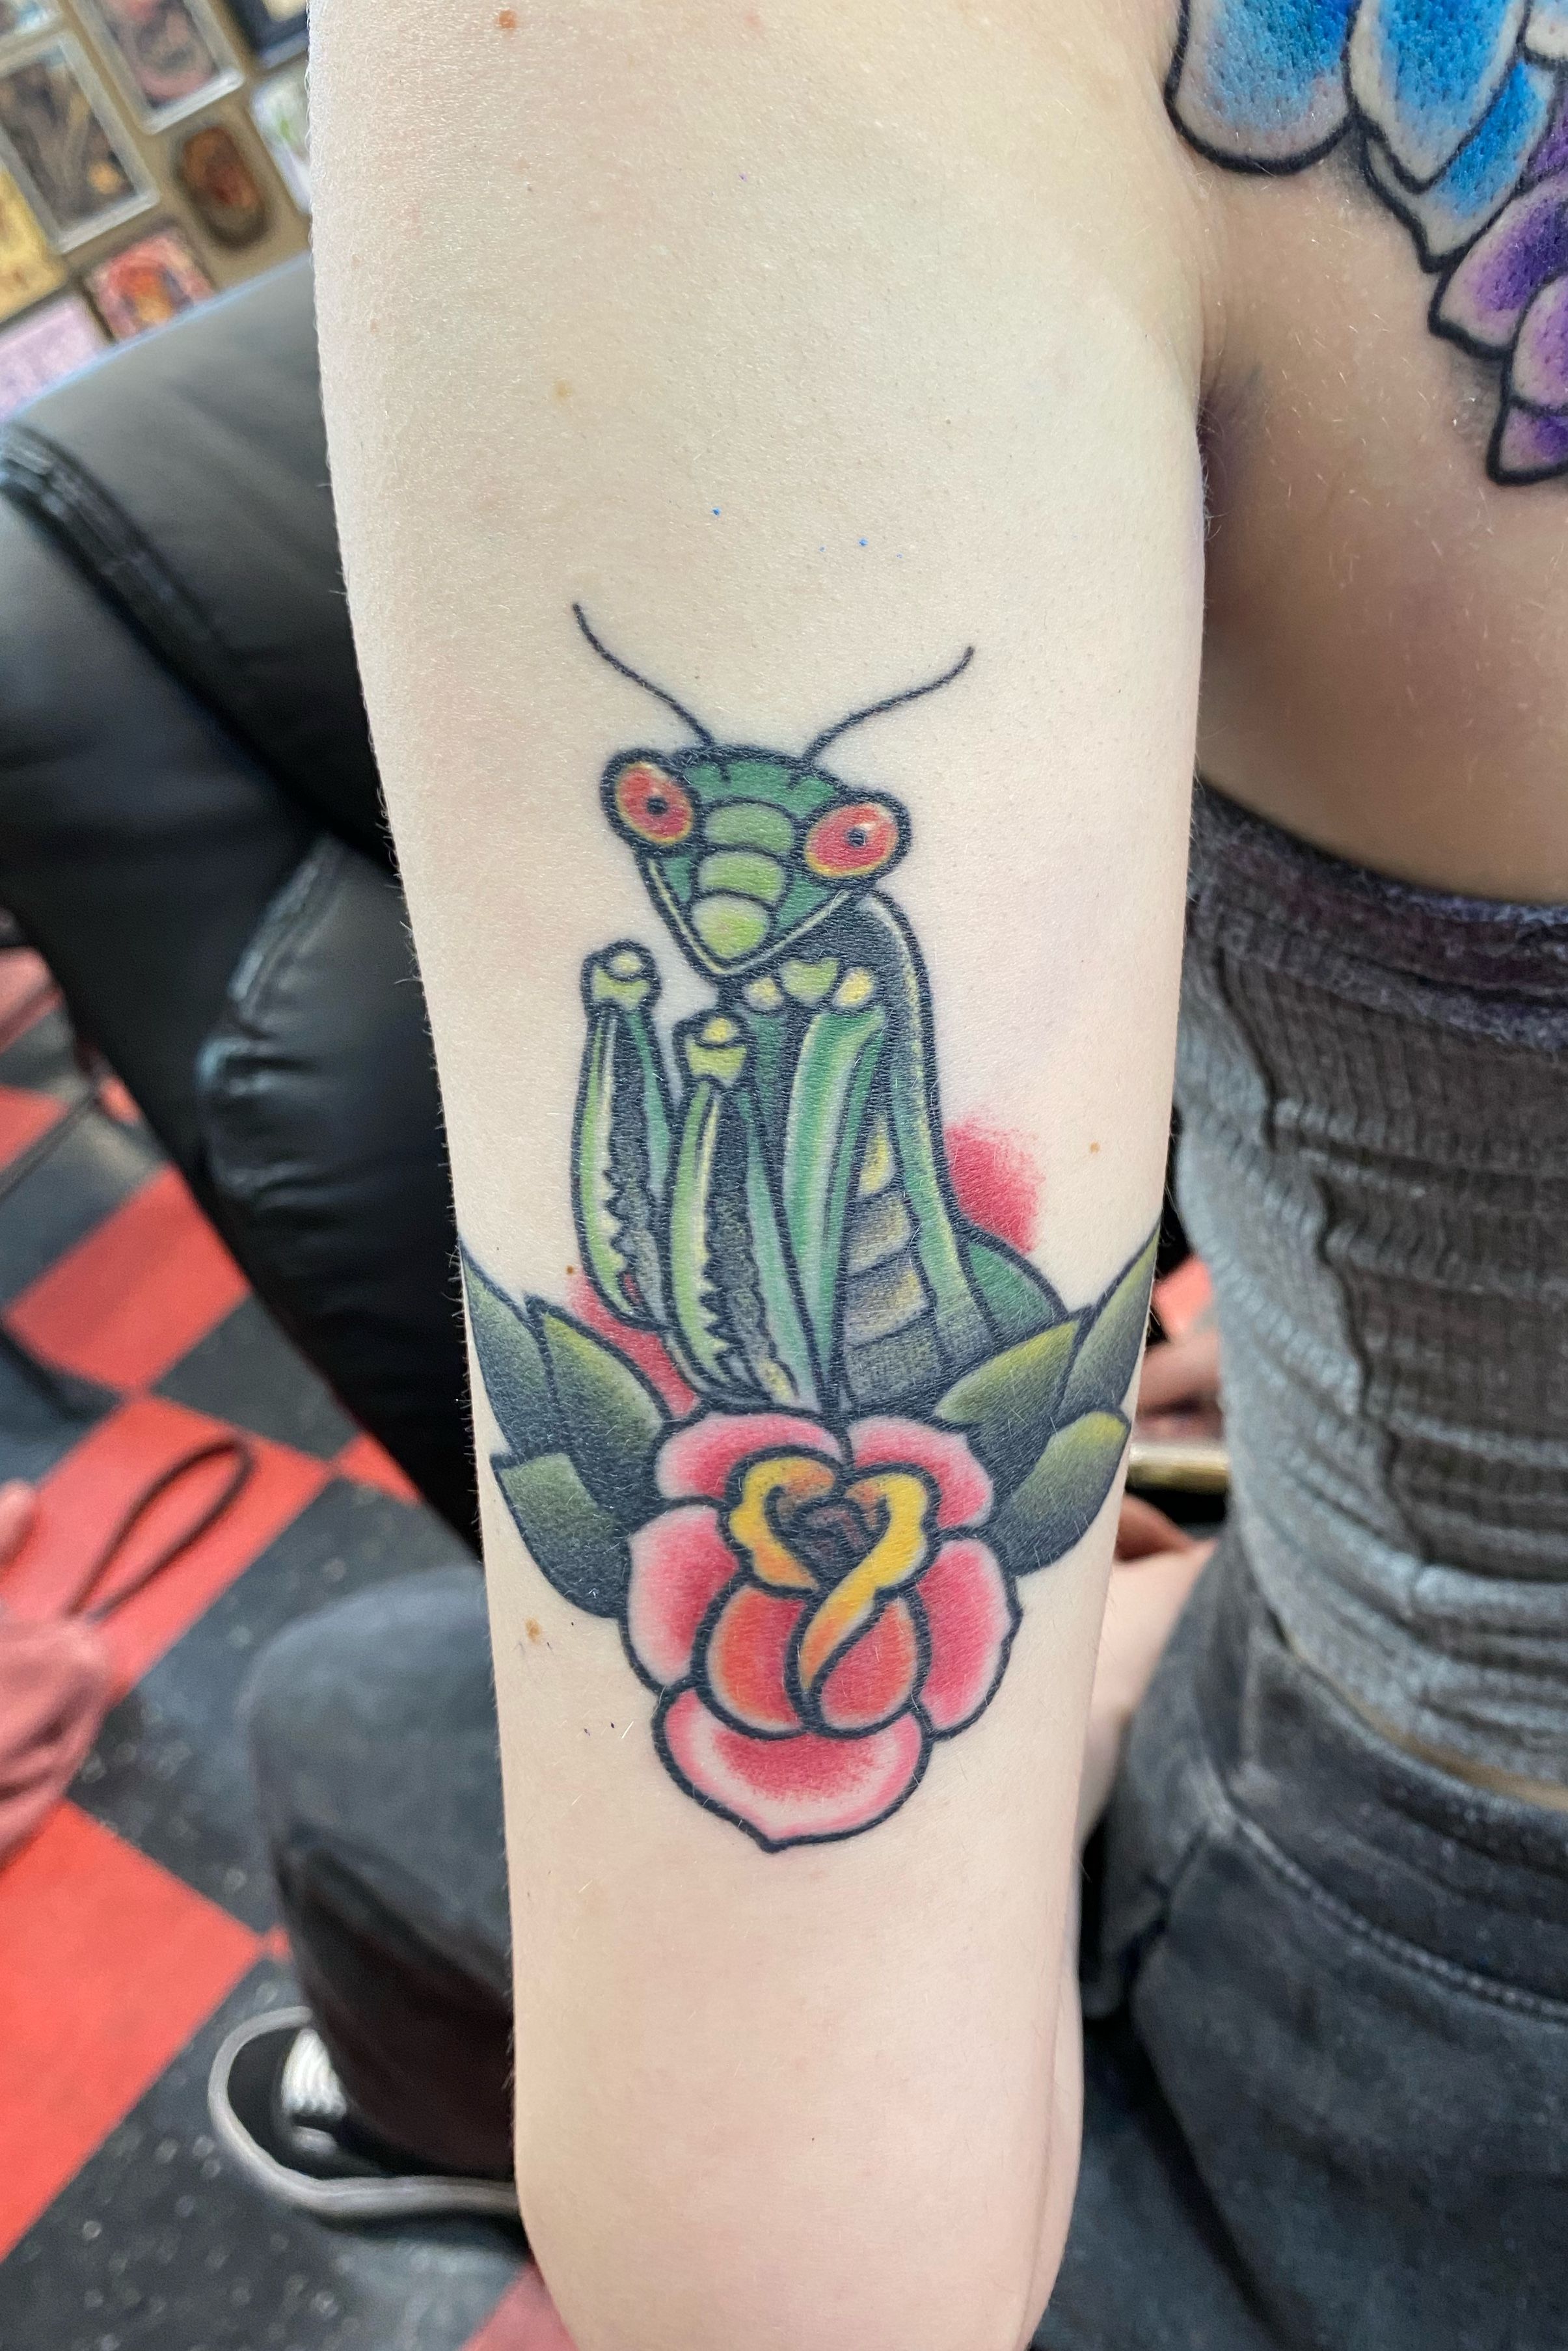 Tailor Made Tattoo  Orchids and orchid mantis for Han by our juniorjammo   To enquire about your idea email Peta at Juniortattoosandartgmailcom or  text 0423176620 Wwwtailormadetattoocomau Wwwjuniortattoosandartcom   Facebook